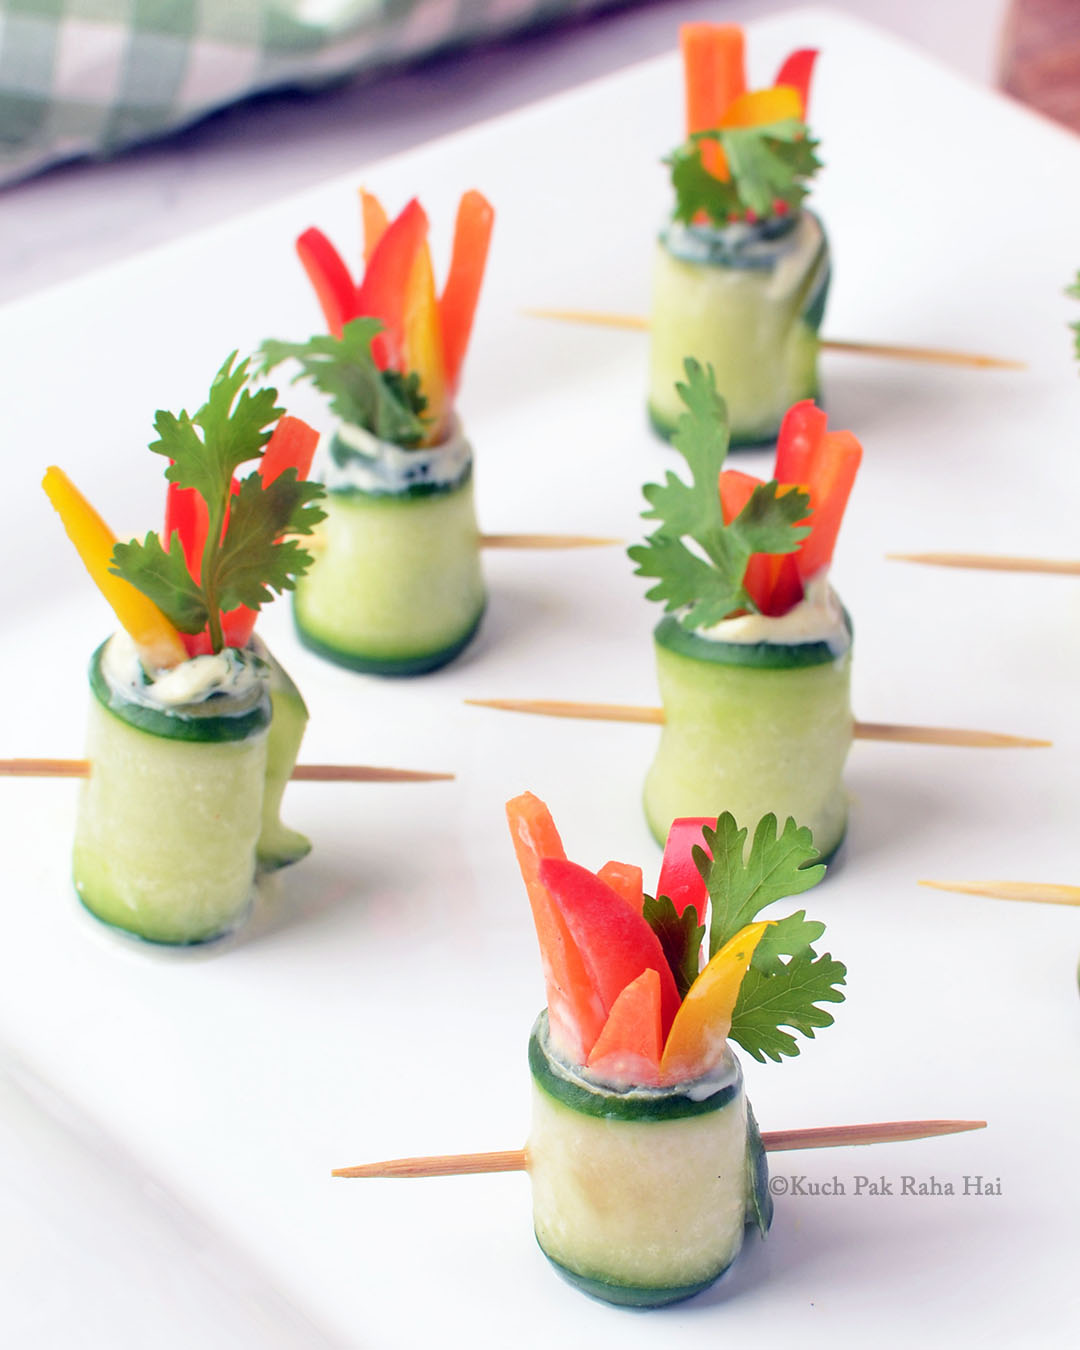 Rolled cucumbers with veggies.